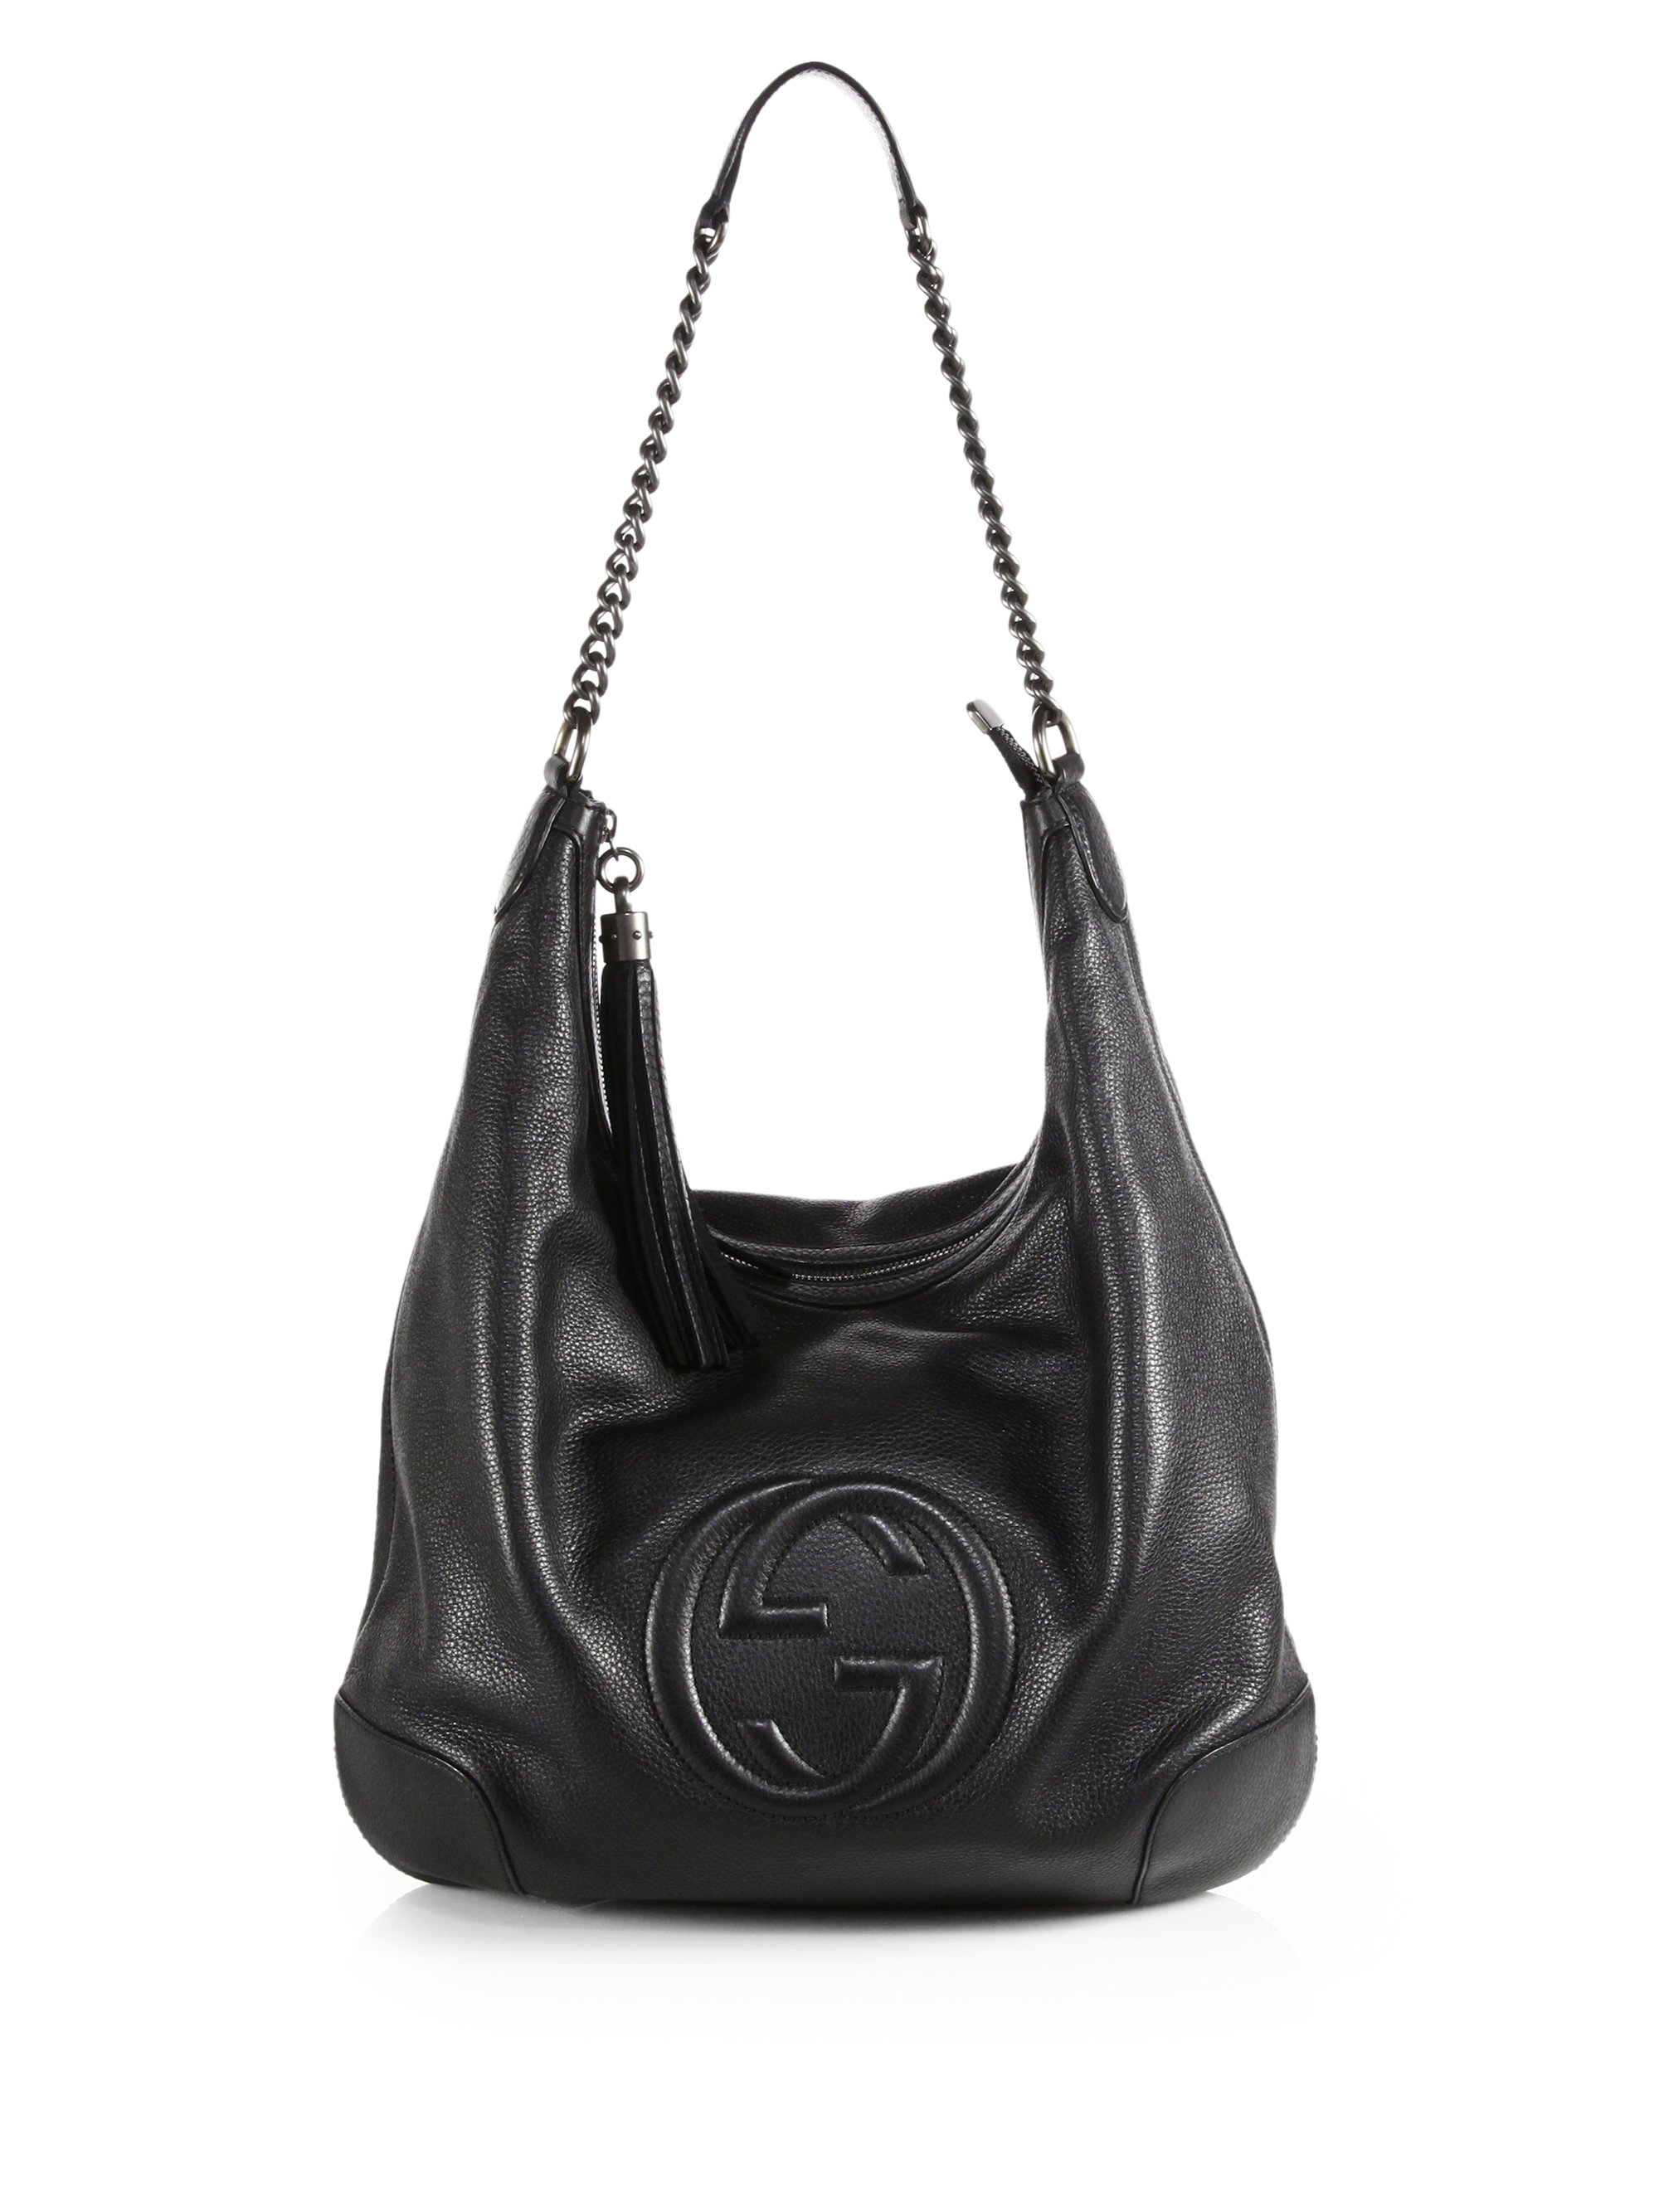 Gucci Medium Soho Black Leather Shoulder Bag With Chain Straps The Art Of Mike Mignola